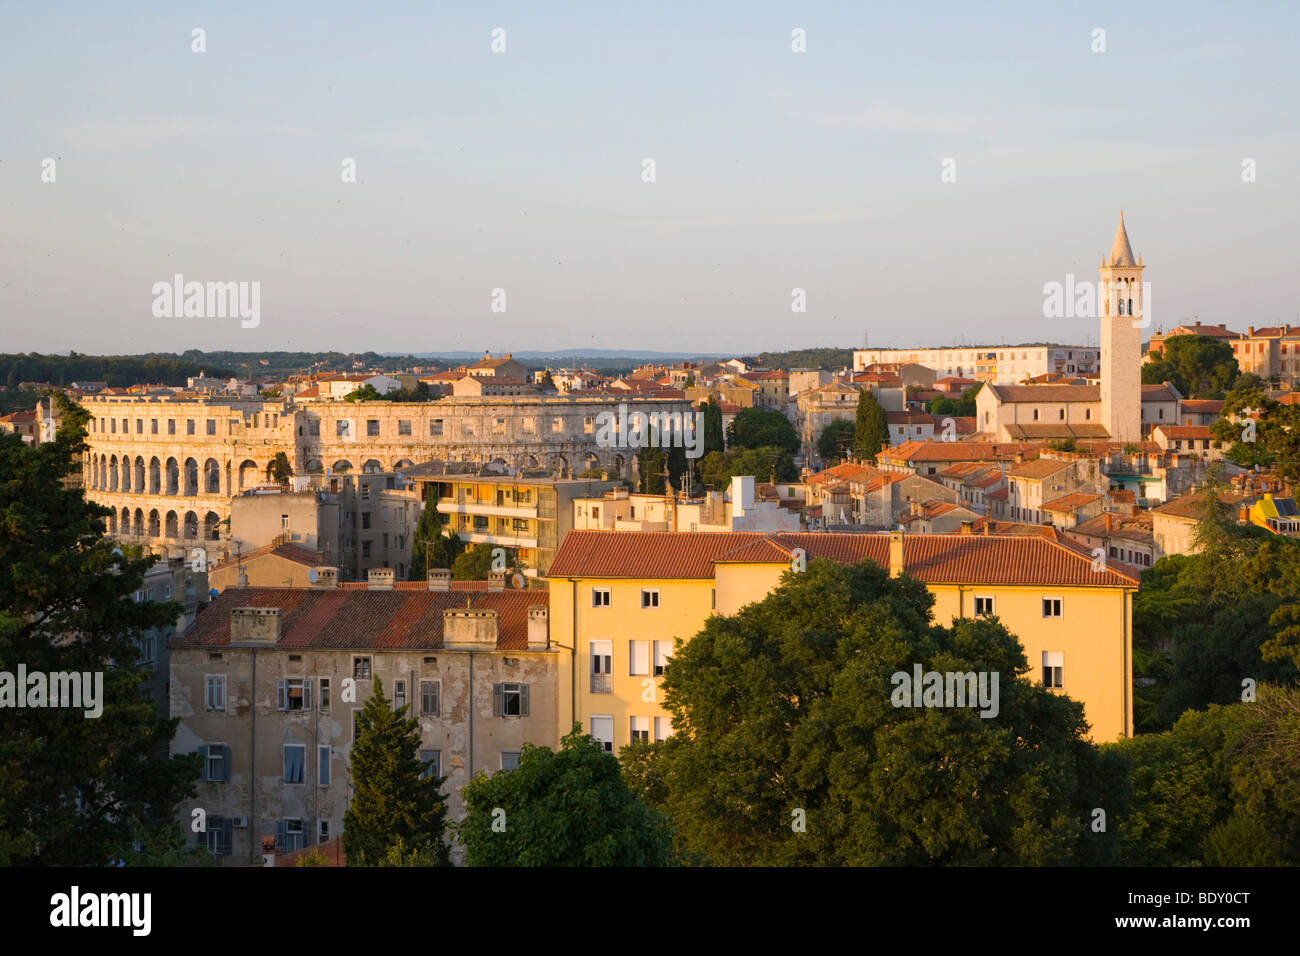 View on the city with Roman Arena from Pula Castle, Kastel, Pula, Istria, Croatia, Europe Stock Photo